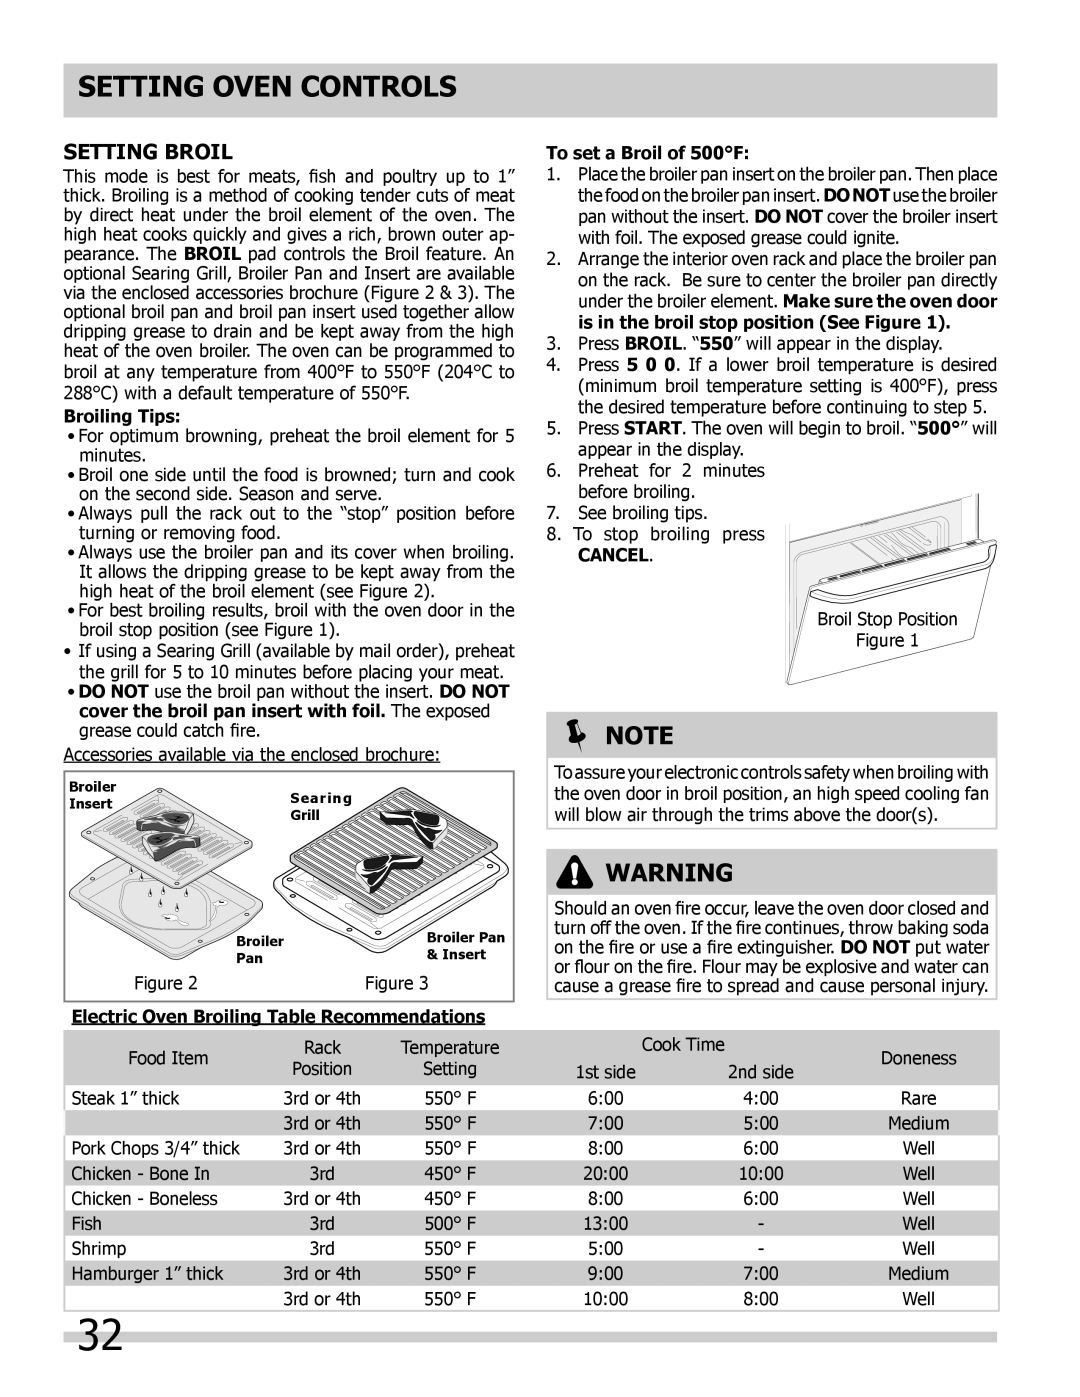 Frigidaire 318205300 Setting Broil, Setting Oven Controls,  Note, Broiling Tips, To set a Broil of 500F, Cancel 